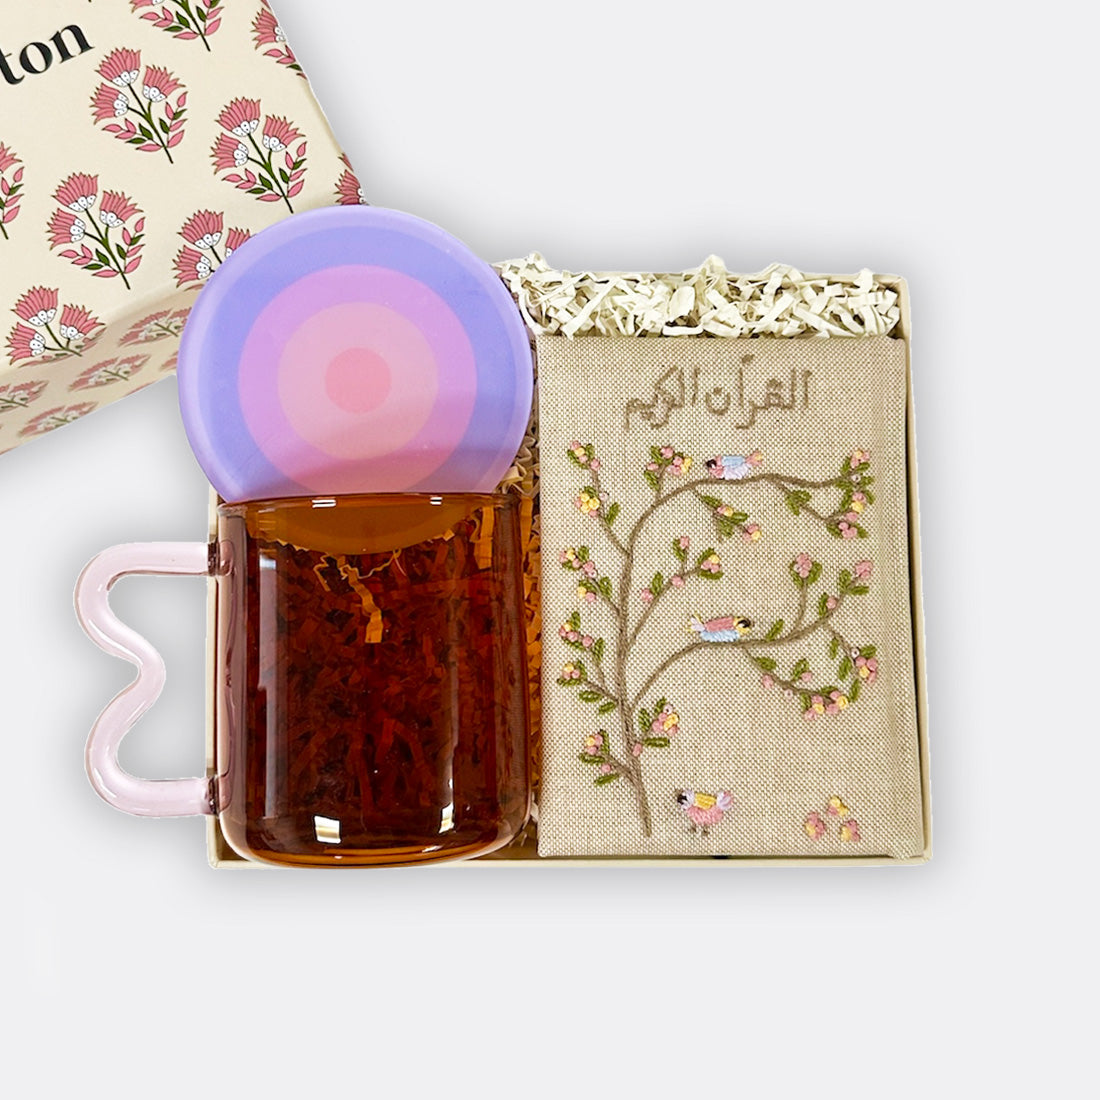 Hand embroidered Quran, Borosilicate Glass Mug, and Spiral Coaster, shop the best ramadan gift gifts for her for him from Inna carton online store dubai, UAE!